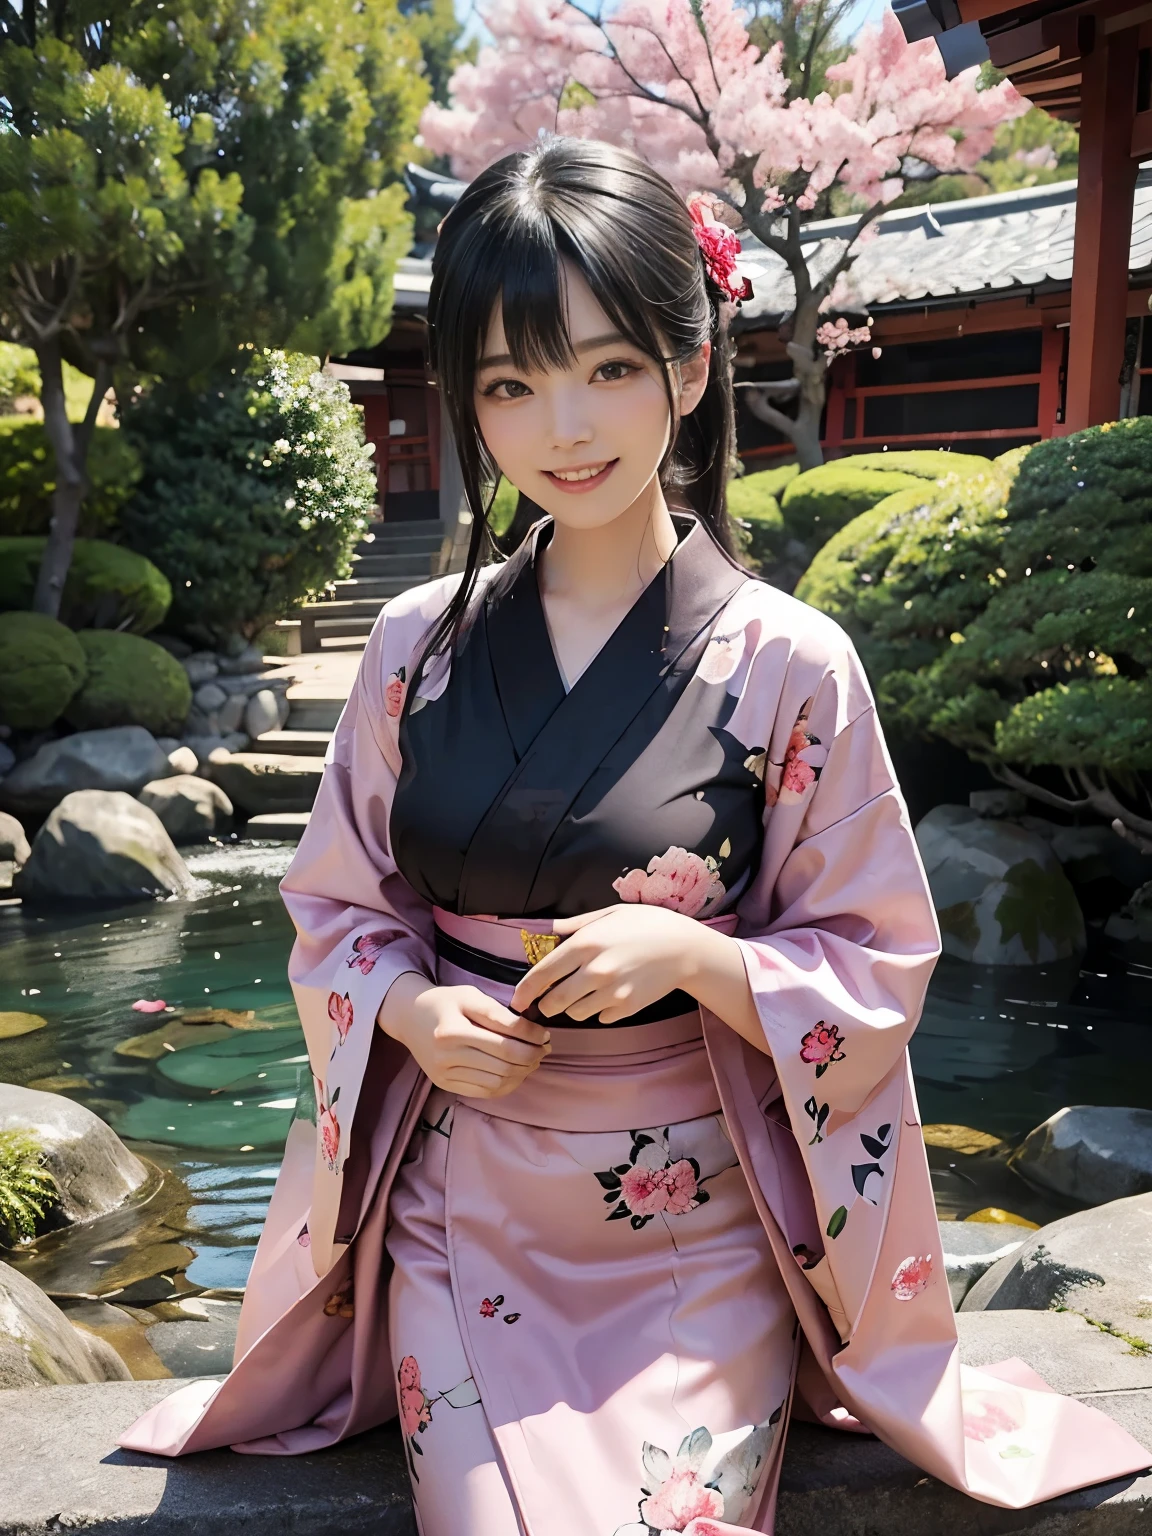 (ultra realistic), (best illustration), (increase resolution), (8K), (masterpiece), (wallpaper), solo, 1 girl, looking at viewers, black straight hair, slender body, plump breasts, pureerosfaceace_v1, happy smile, pink floral Yukata, Japanese Garden